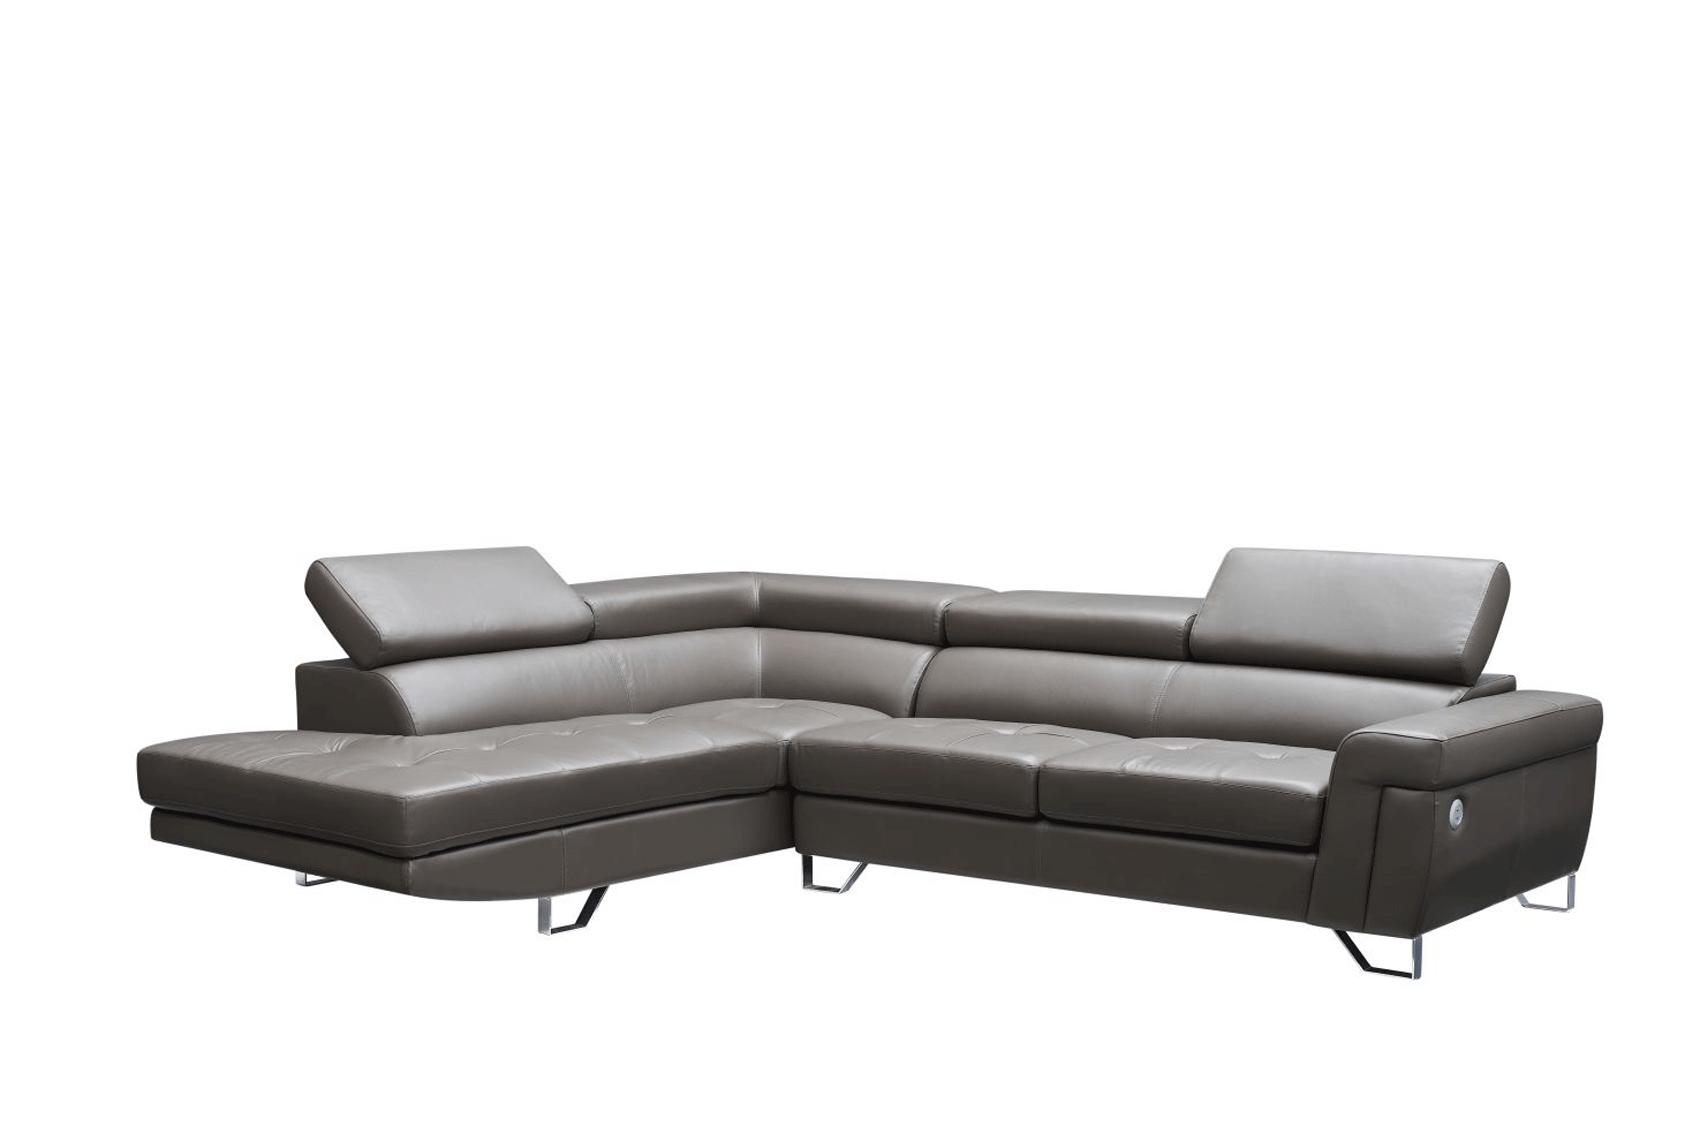   1807 Sectional Left  